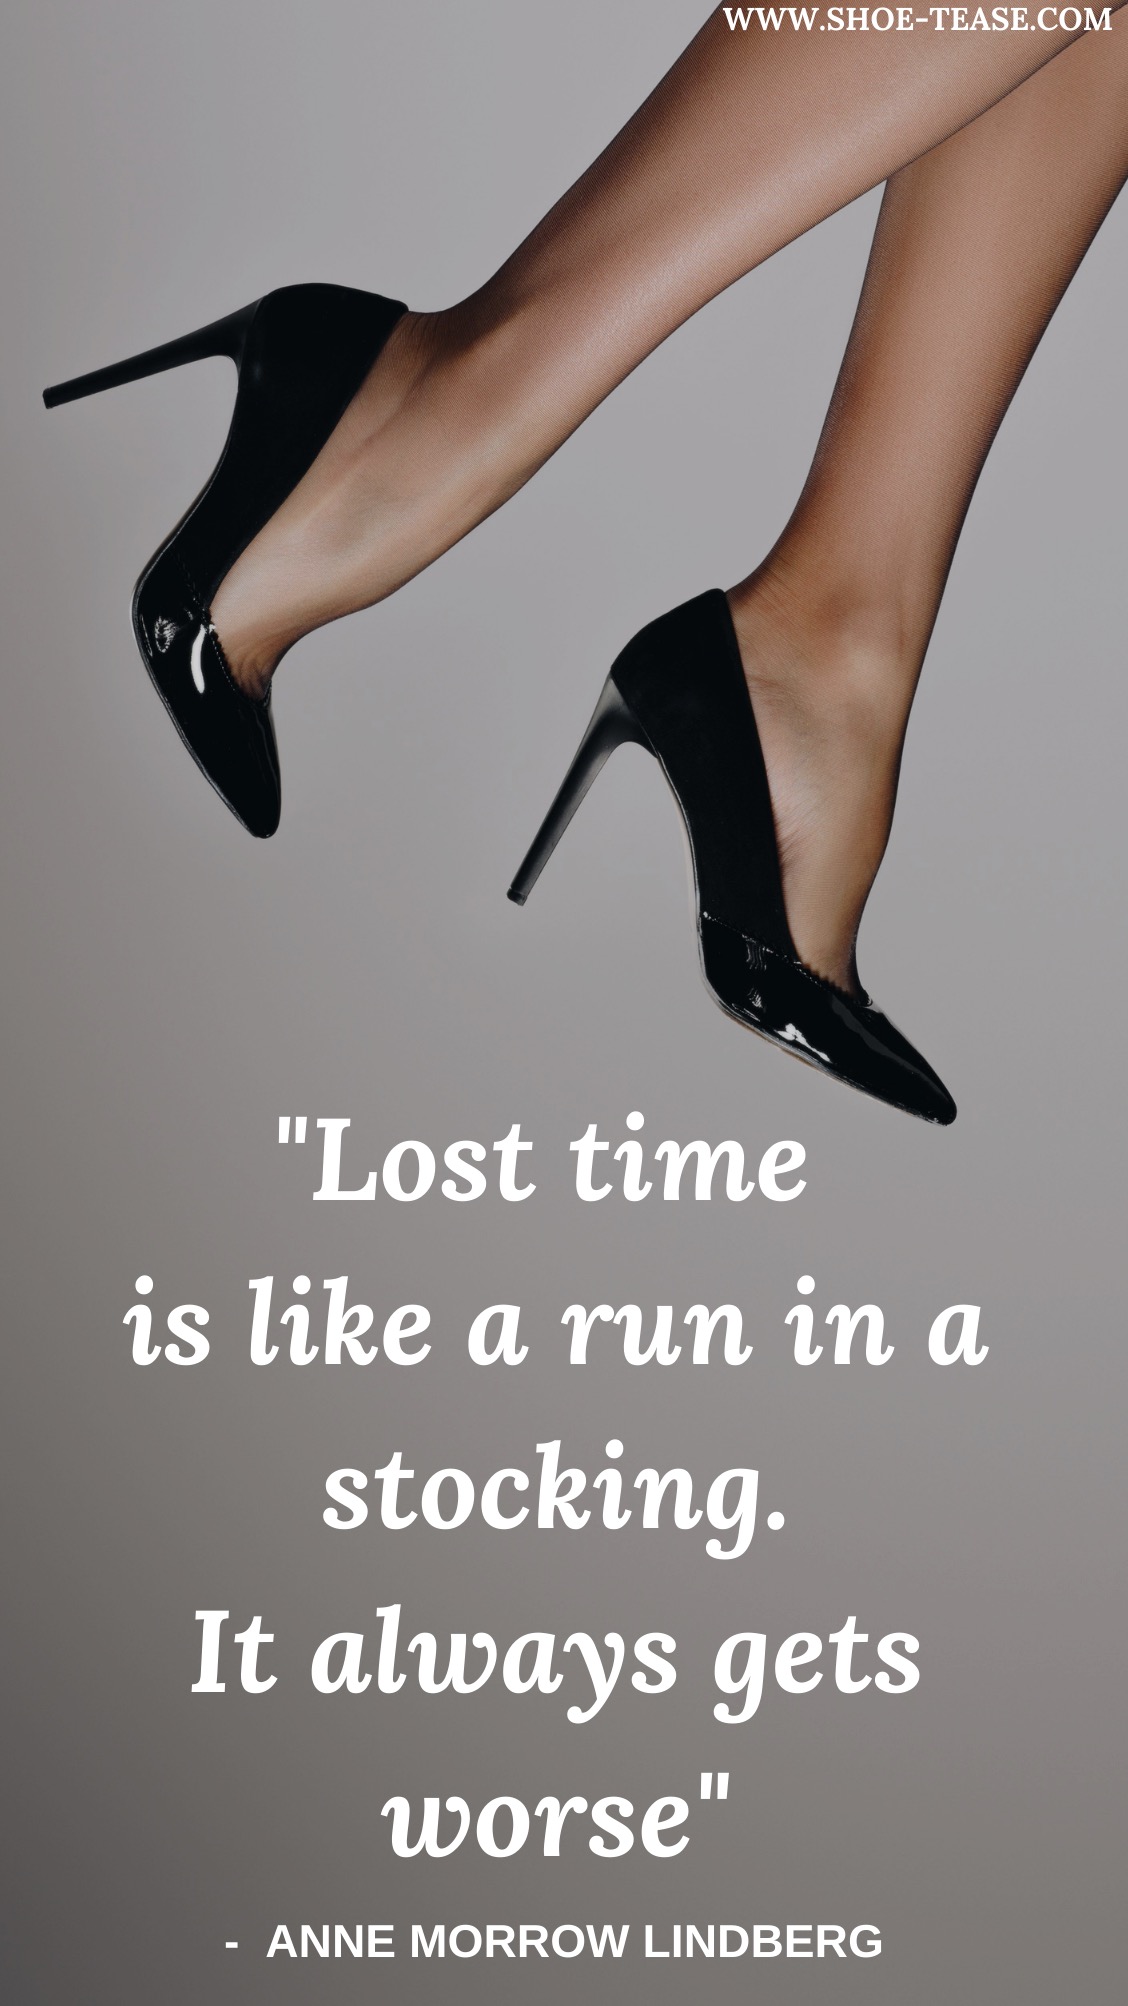 Text reading Lost time is like a run in a stocking. It always gets worse by Anne Morrow Lindberg under woman's feet wearing sheet pantyhose and black pumps dangling in the air.